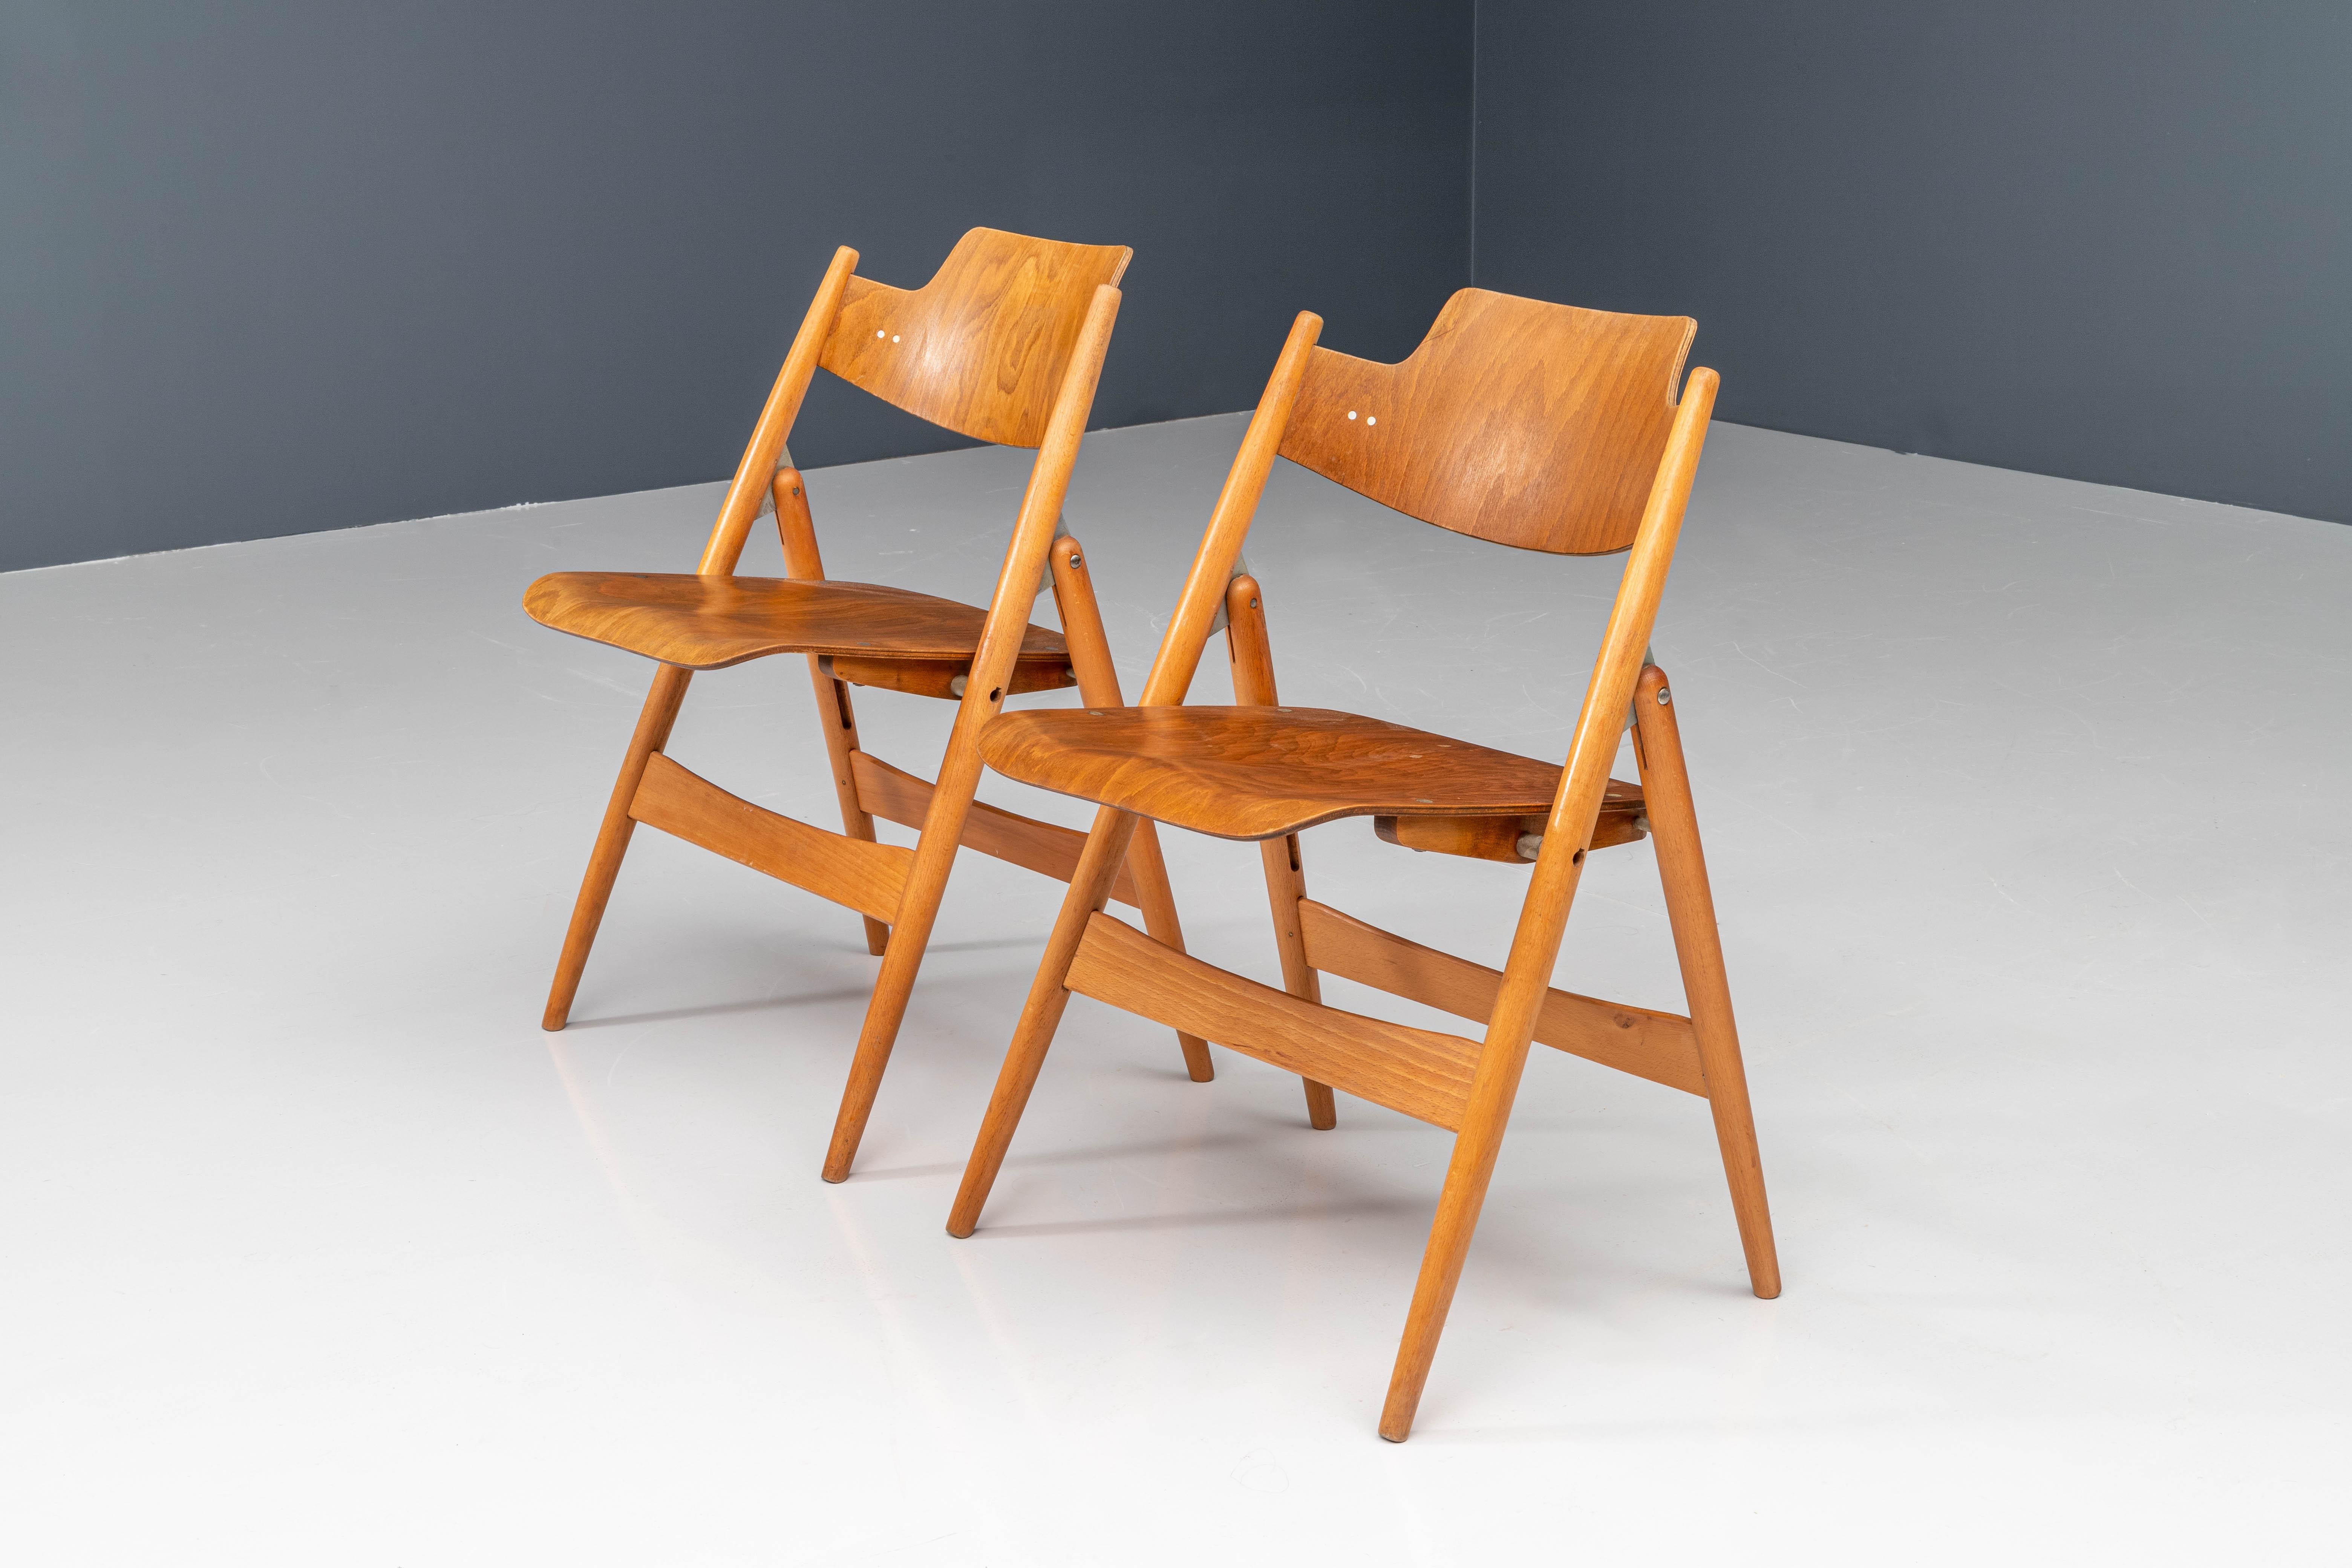 These folding chairs, model SE18, were designed in 1952 by German architect Egon Eiermann for Wilde & Spieth. Its frame is made from beech wood whereas the seat and backrest are made from molded plywood with beech veneer. The chair is now on display